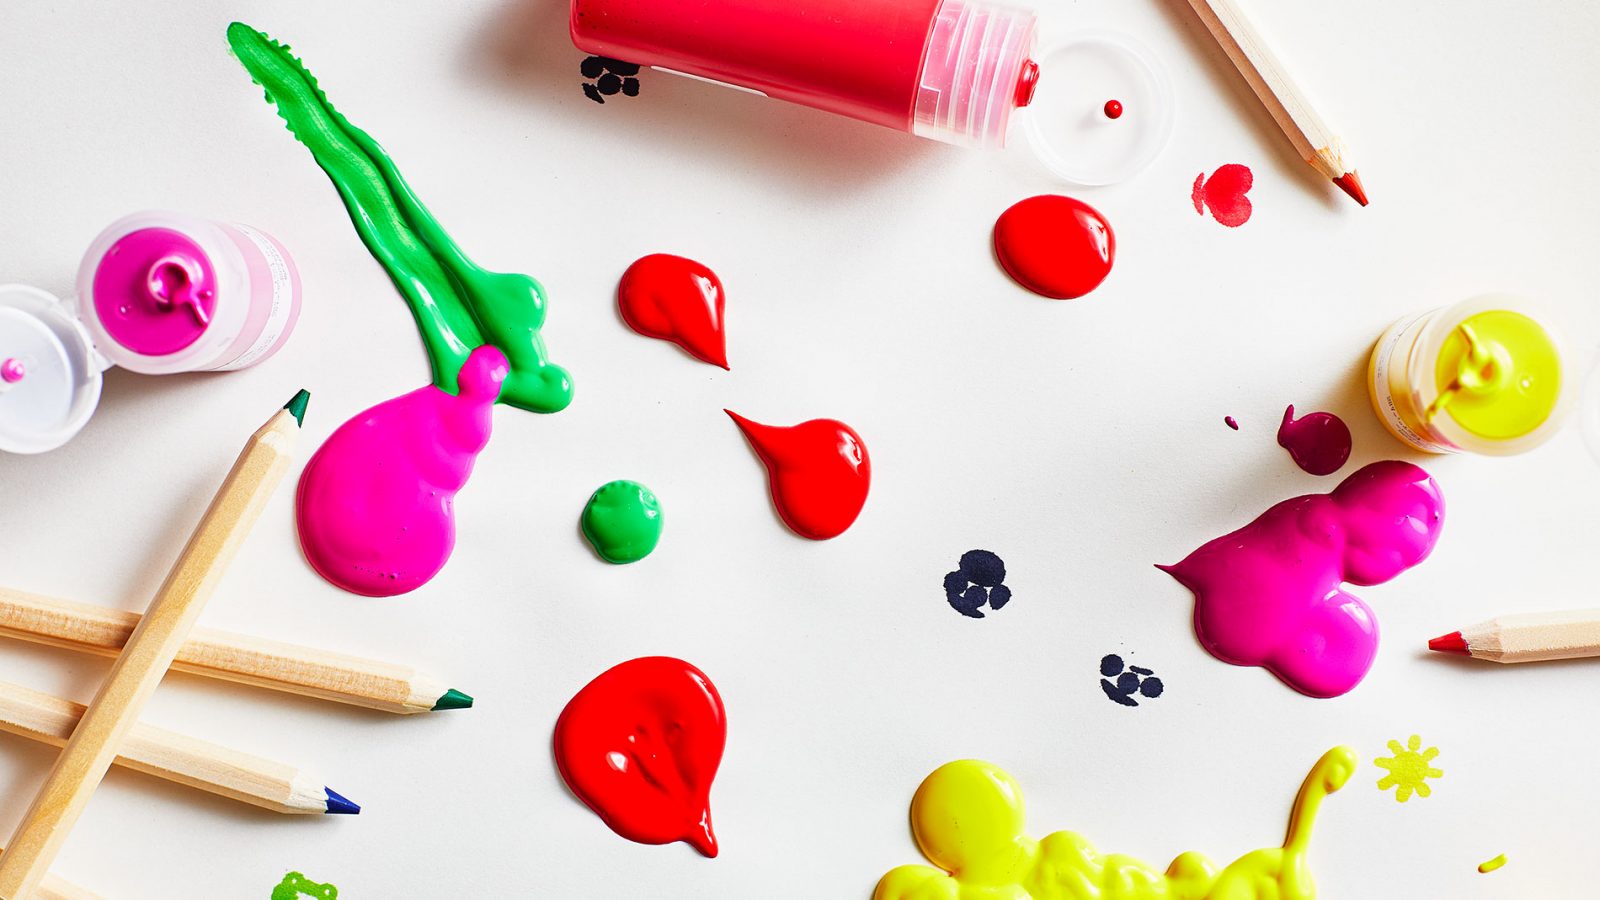 Wooden pencils in mixed colours and splashes of yellow, green, pink and red paint on a white surface.